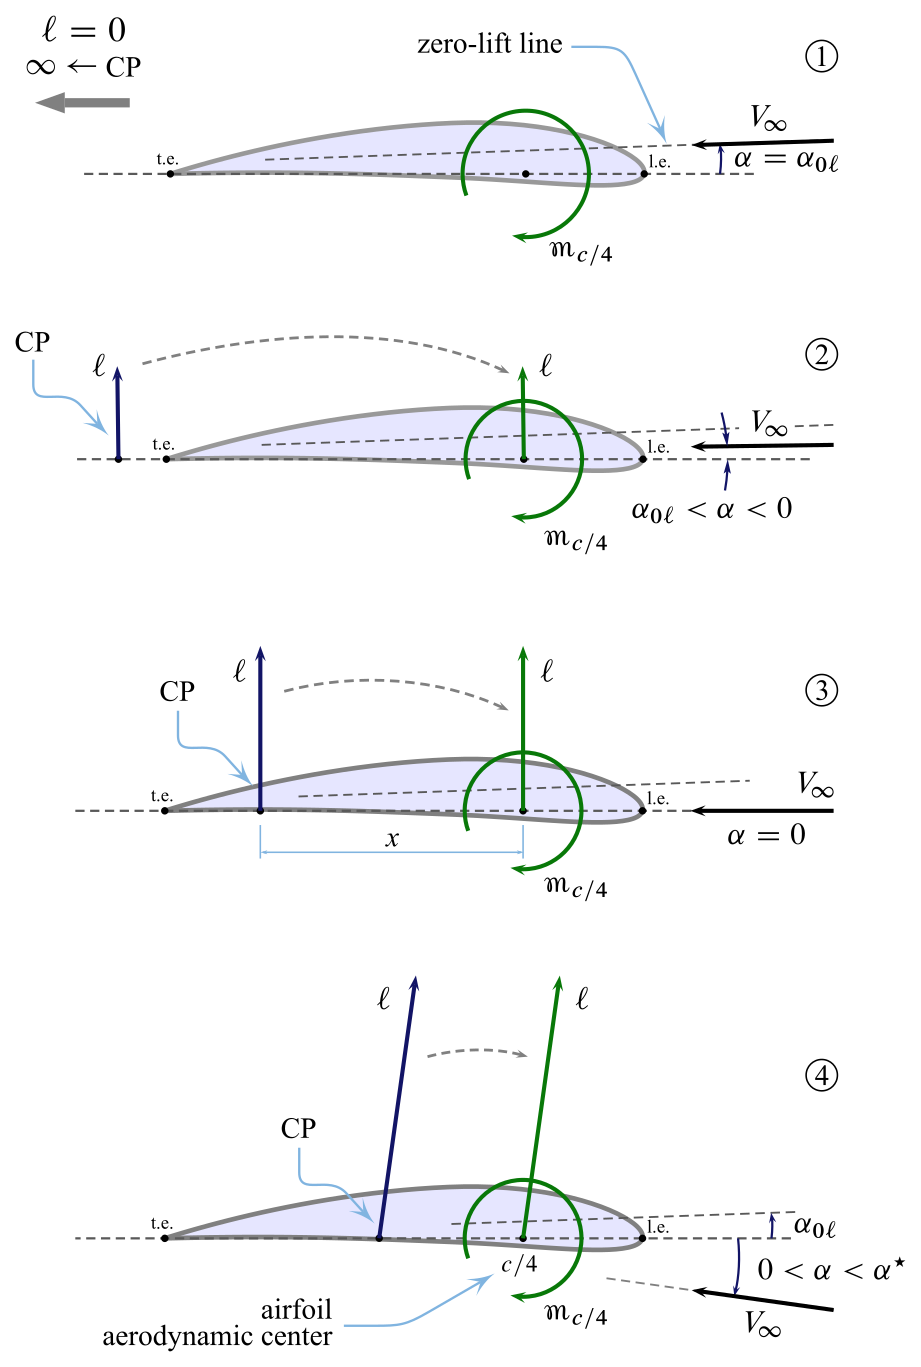 Airfoil center of pressure (CP) variation with angle of attack. System reduction to the aerodynamic center at $c/4$ (approximately).